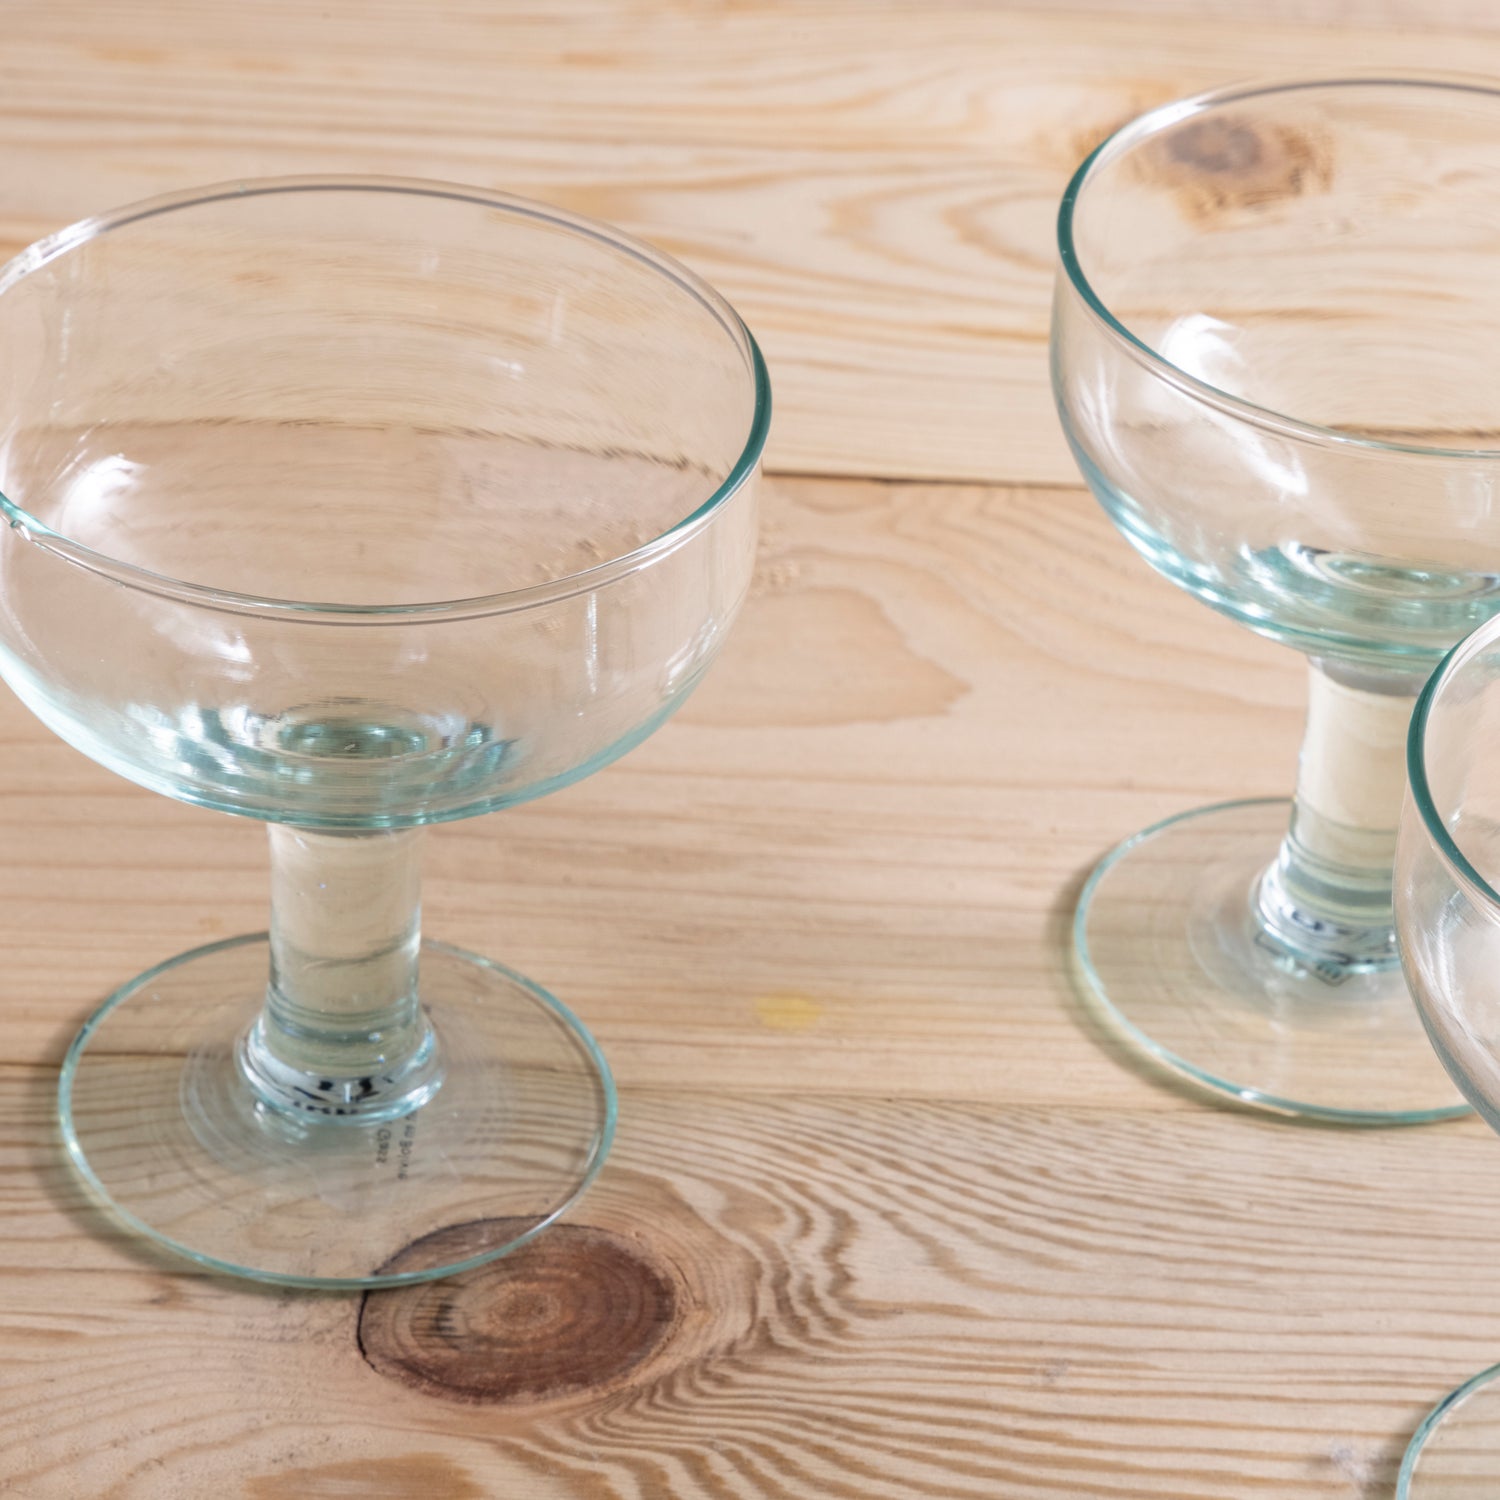 Vintage Champagne Coupe Glasses, Set of 4